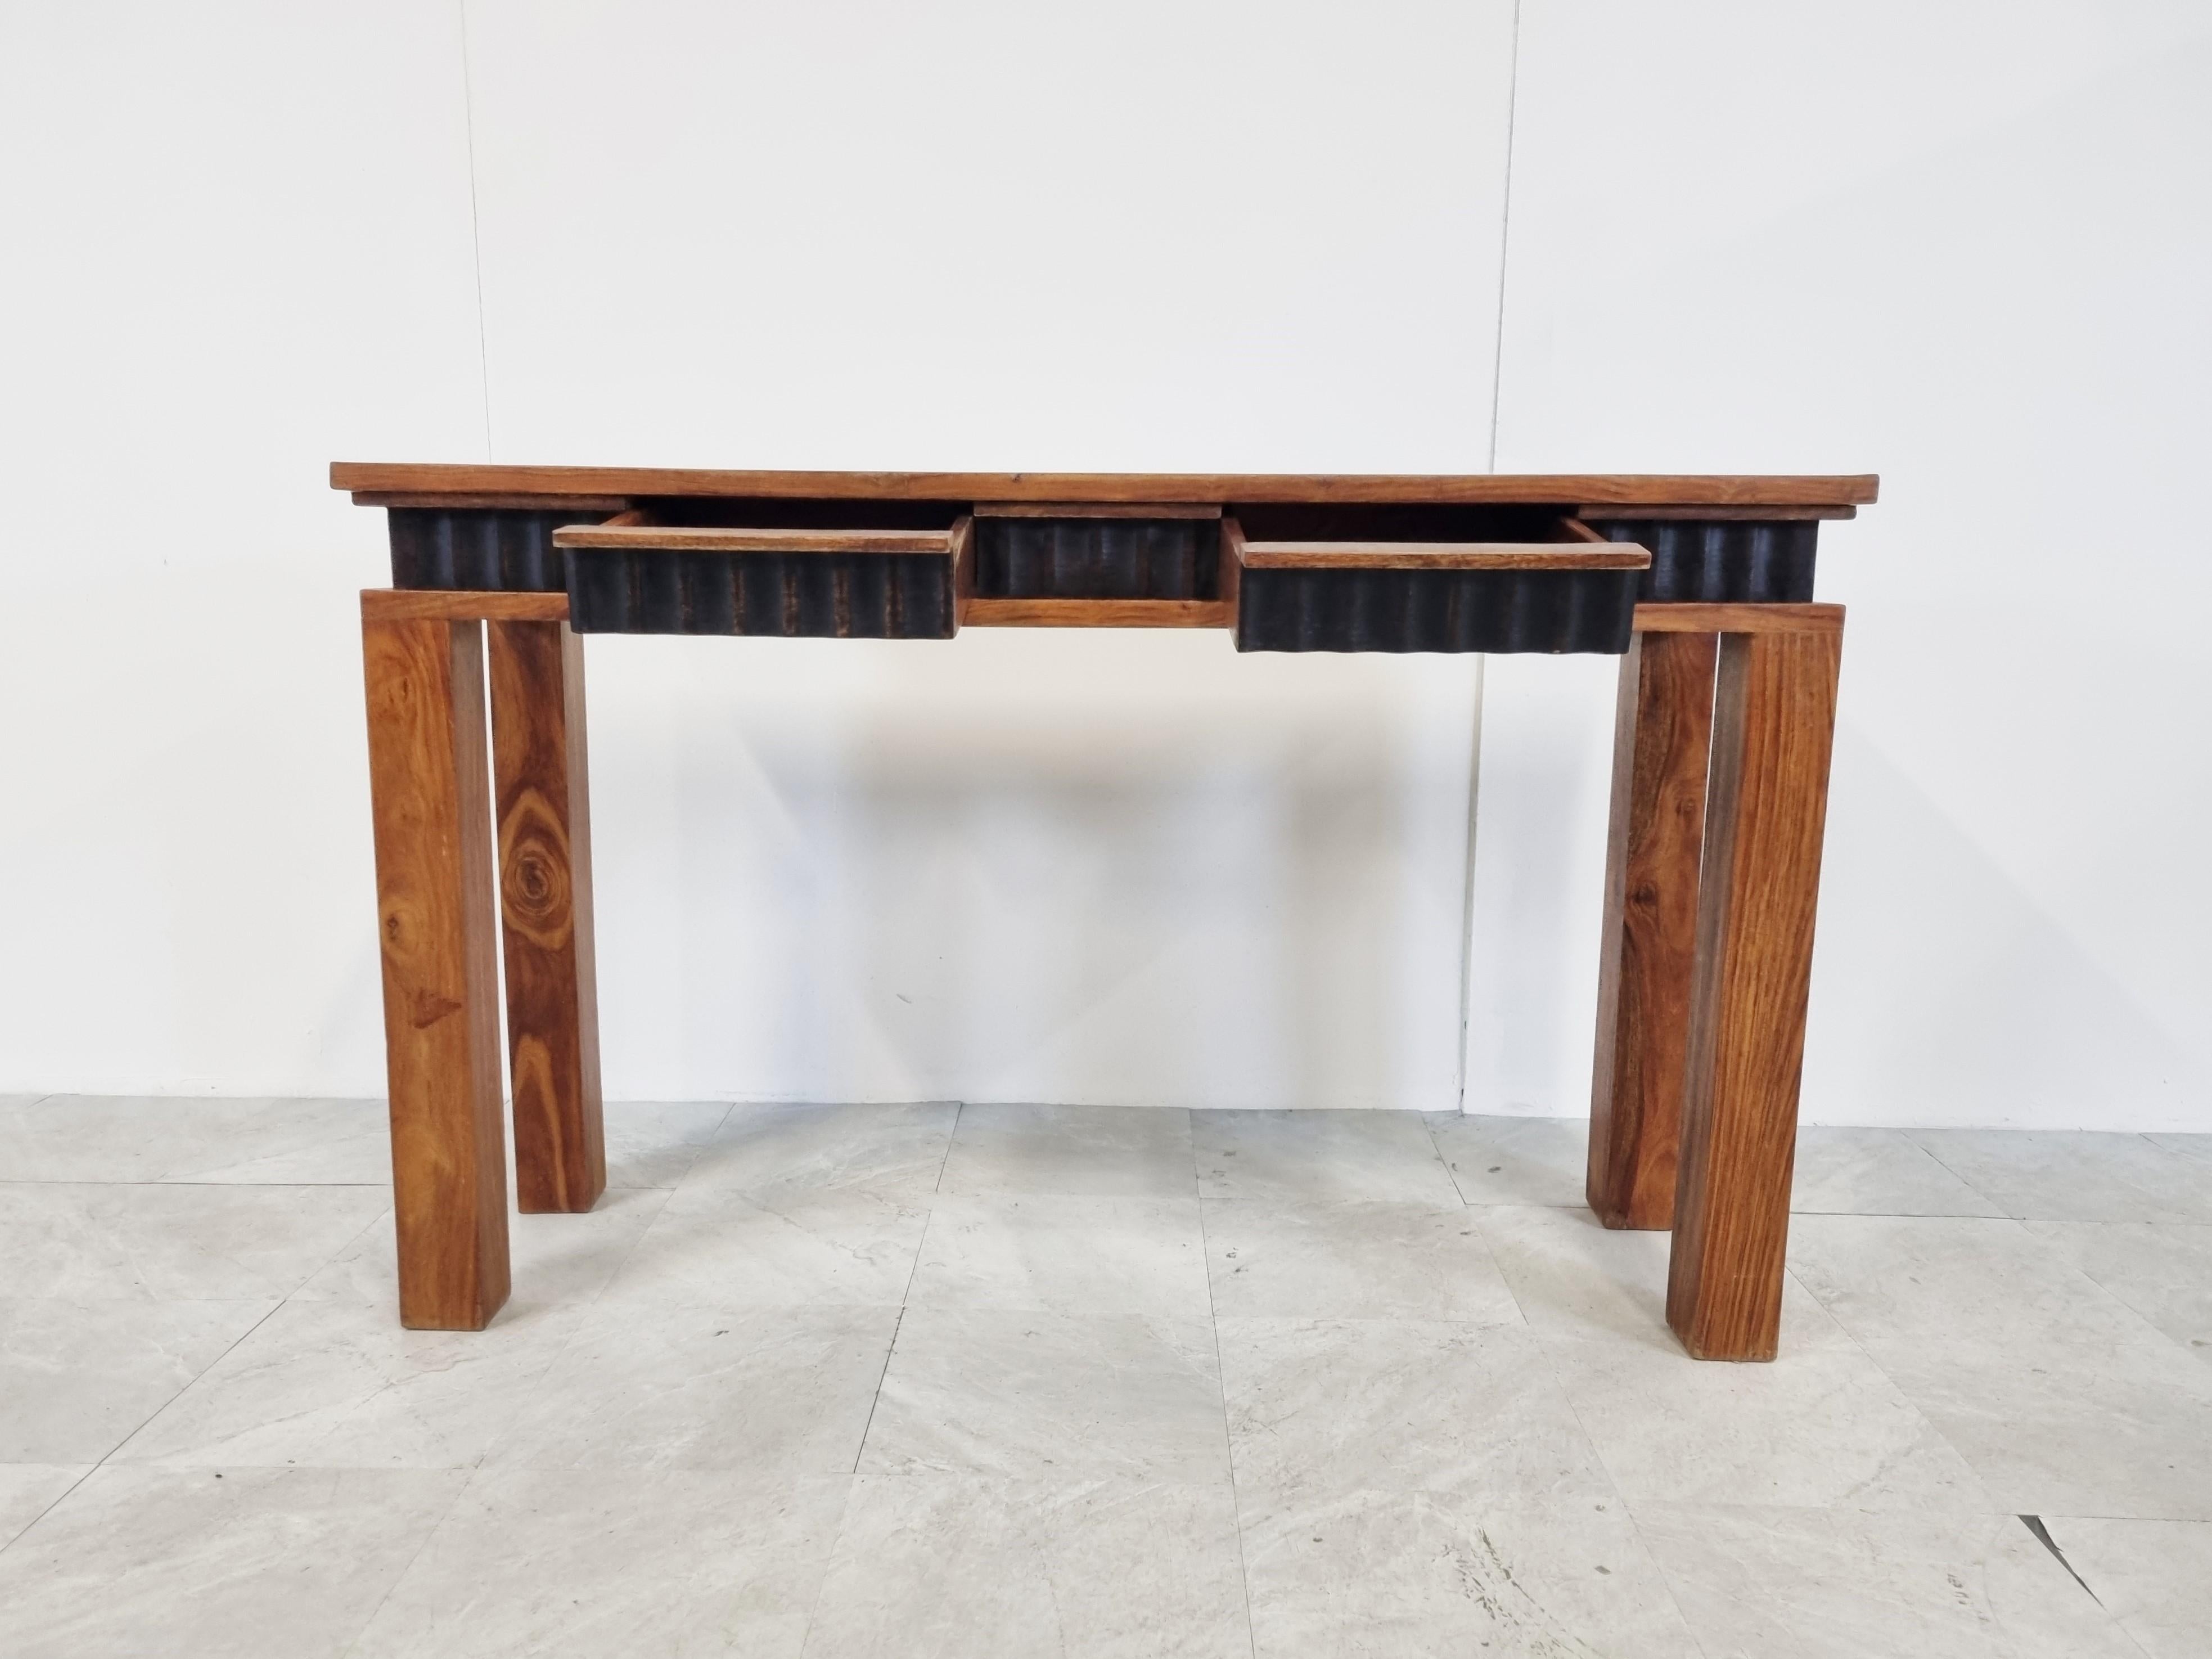 Vintage Art Deco style console table with two integrated drawers.

It also has a bit of a brutalist design.

Good condition.

1960s - Belgium

Dimensions:
Lenght: 131cm/51.57